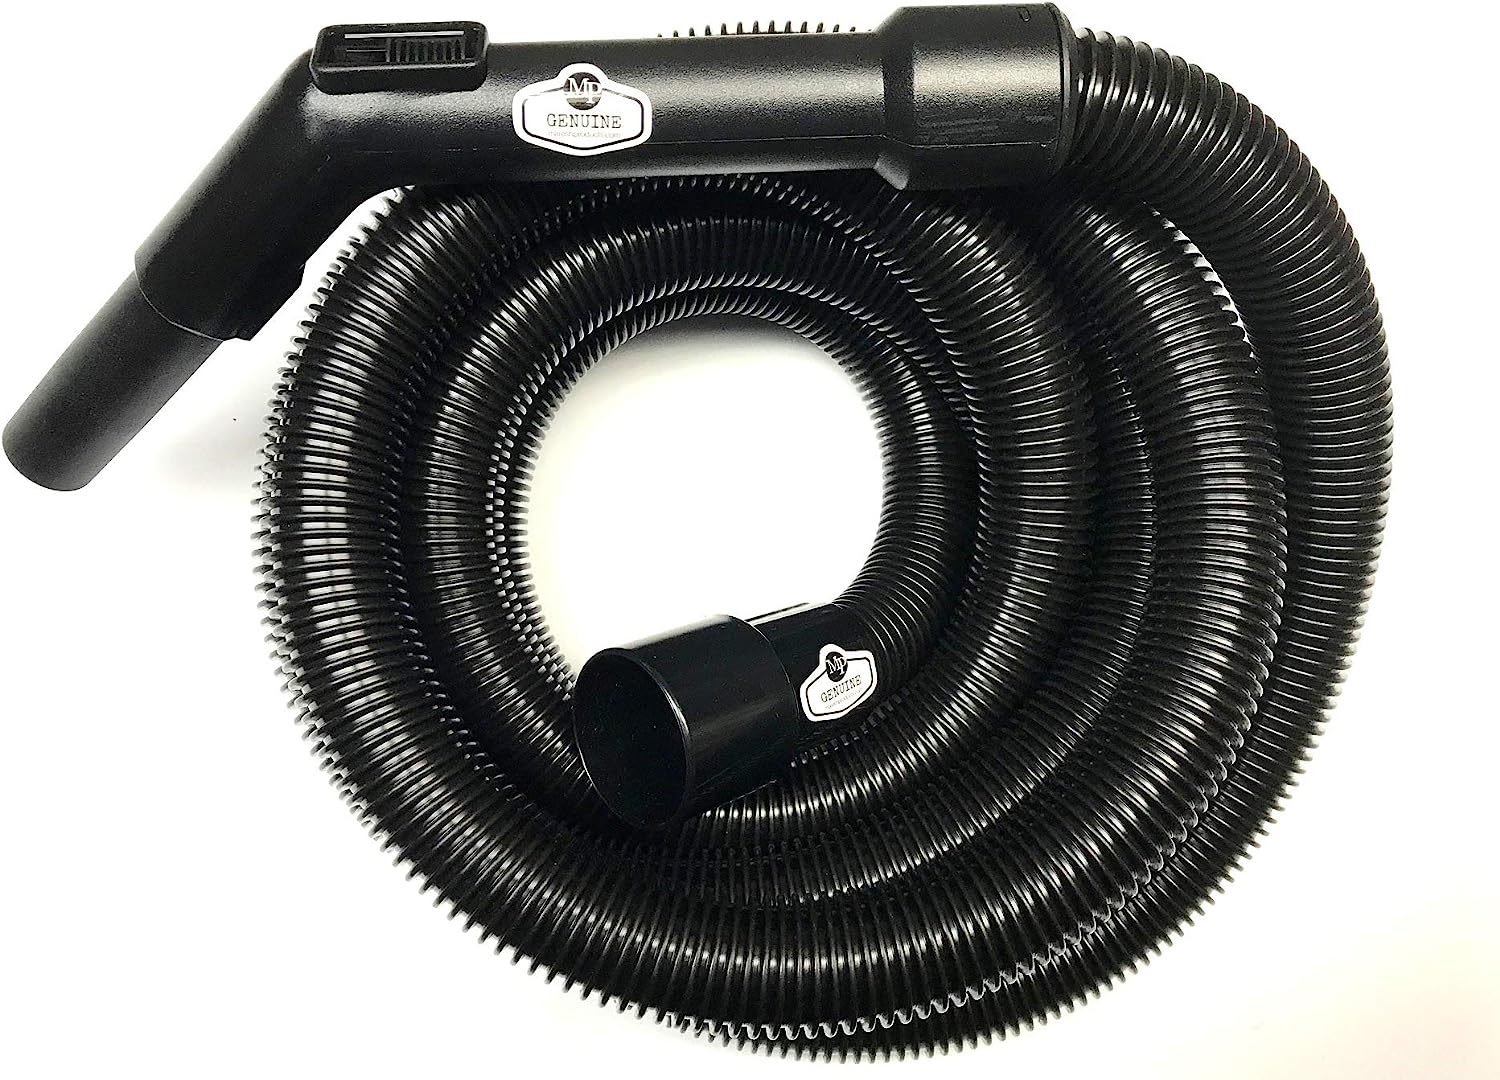 Compatible Replacement for Shop VAC and Ridgid Style Wet Dry Vacuum Cleaner Crushproof Industrial Commercial Grade Extension Hose with Air Suction